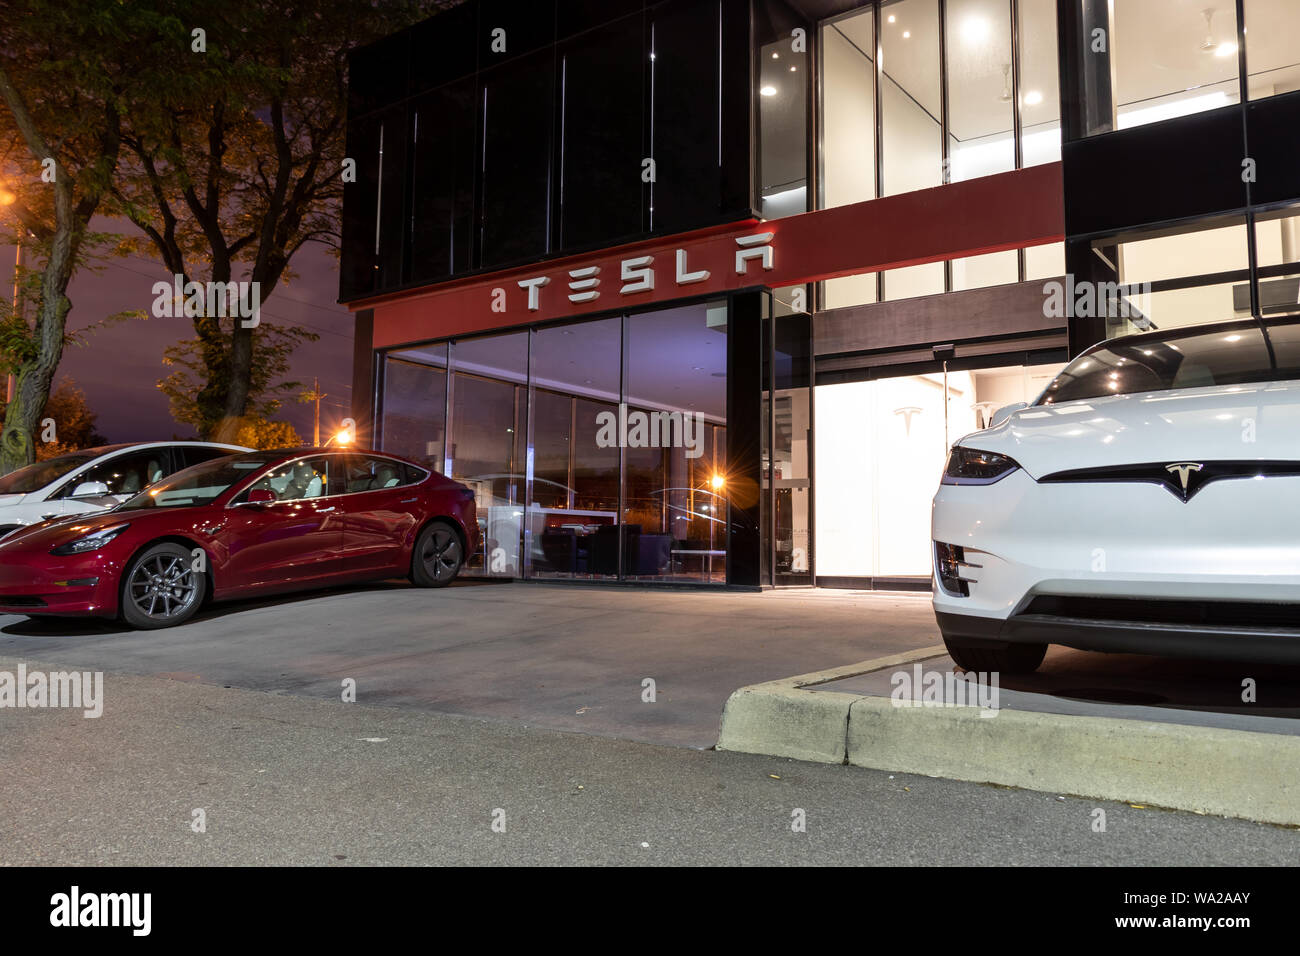 Entrance of Tesla Dealership with new vehicles parked out front, late at night. Stock Photo